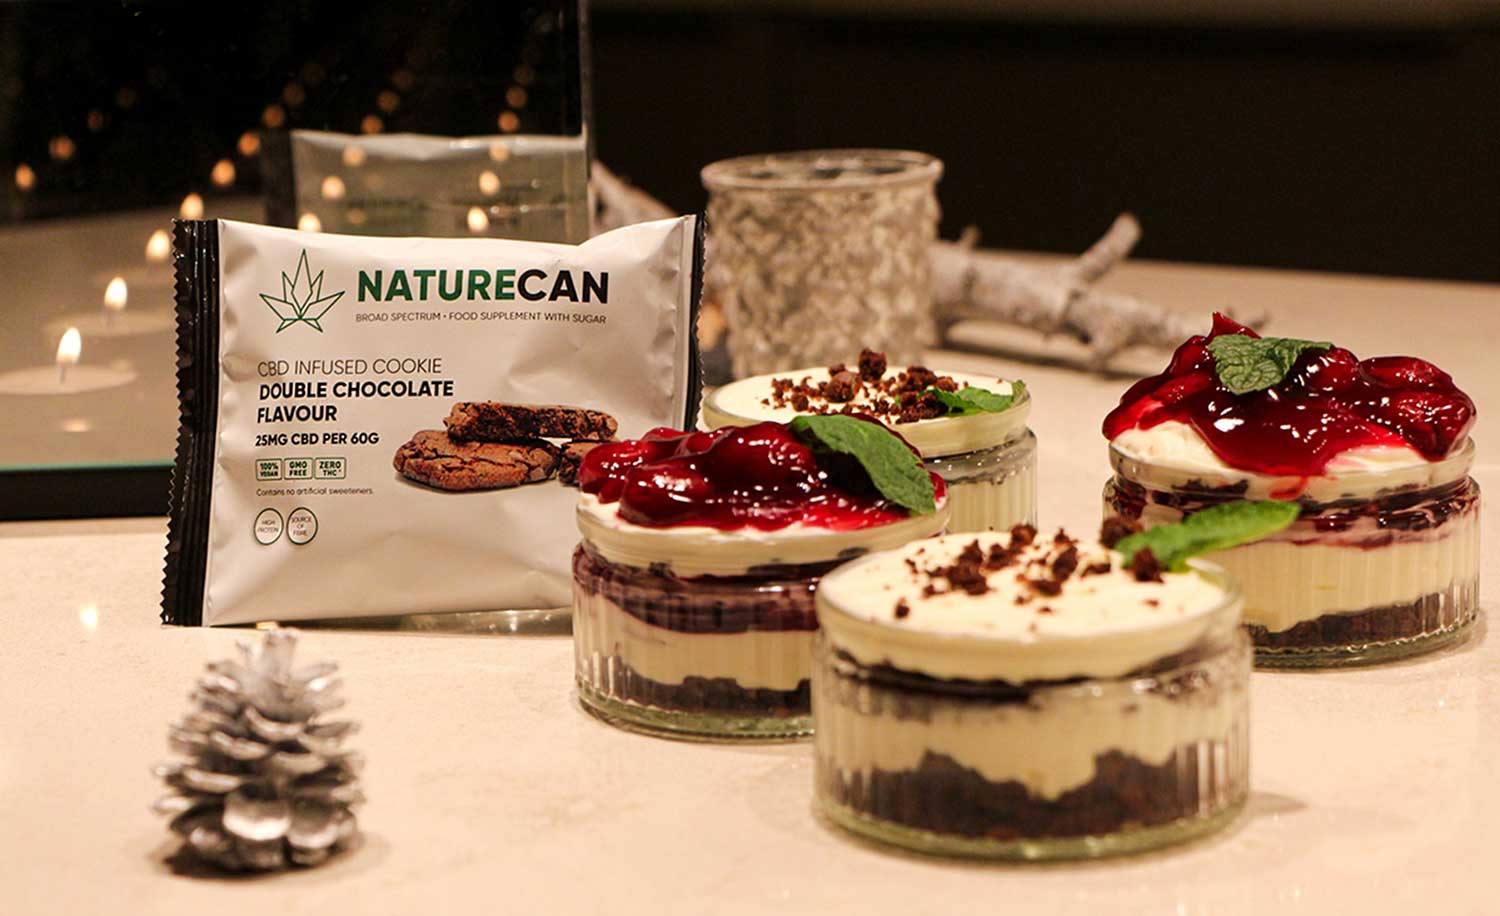 three desserts are sitting on a table next to a bag of naturecan.